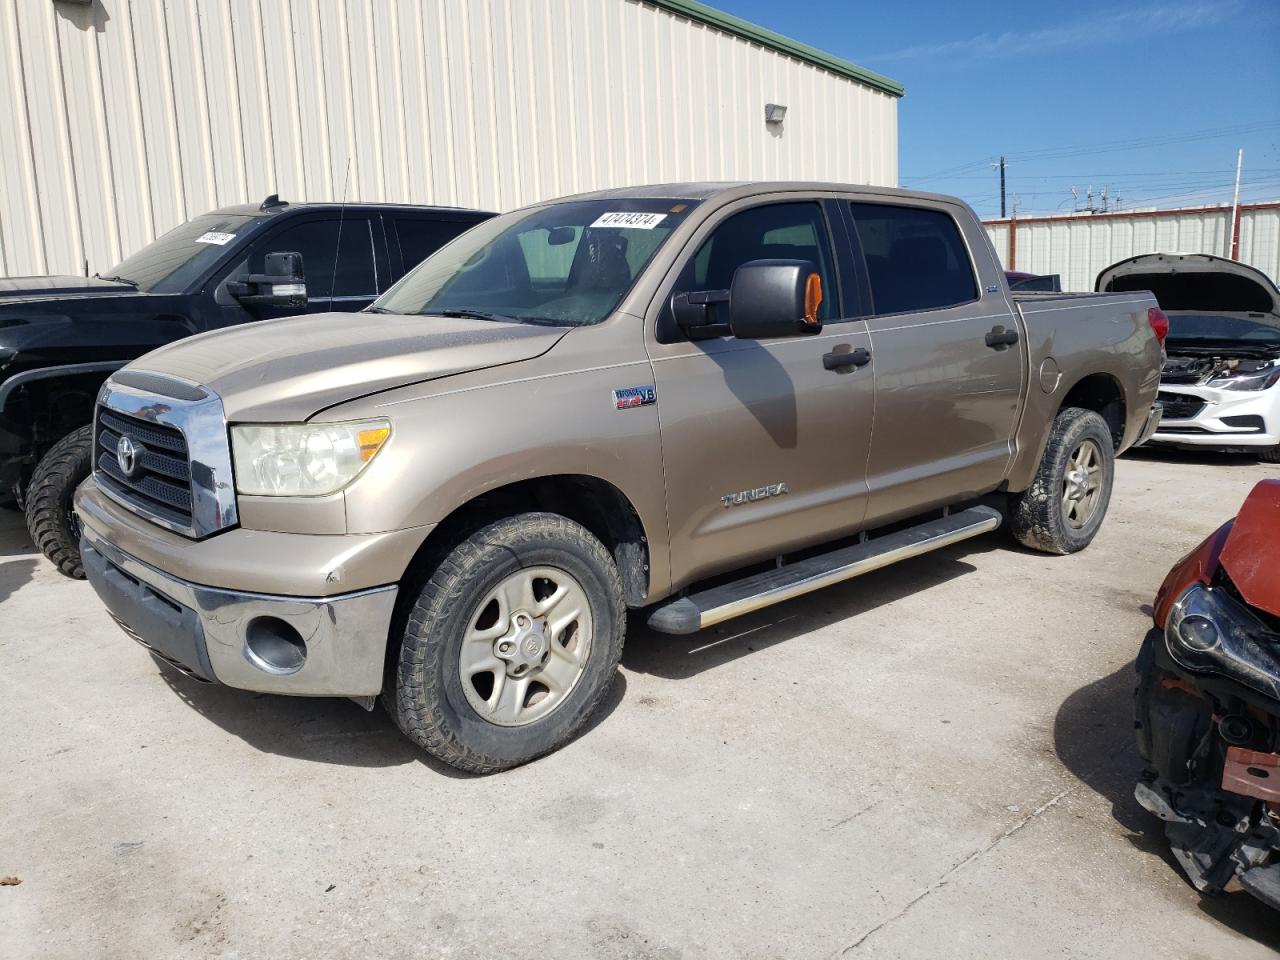 vin: 5TBEV54127S454774 5TBEV54127S454774 2007 toyota tundra 5700 for Sale in 76052 3840, Tx - Ft. Worth, Haslet, USA